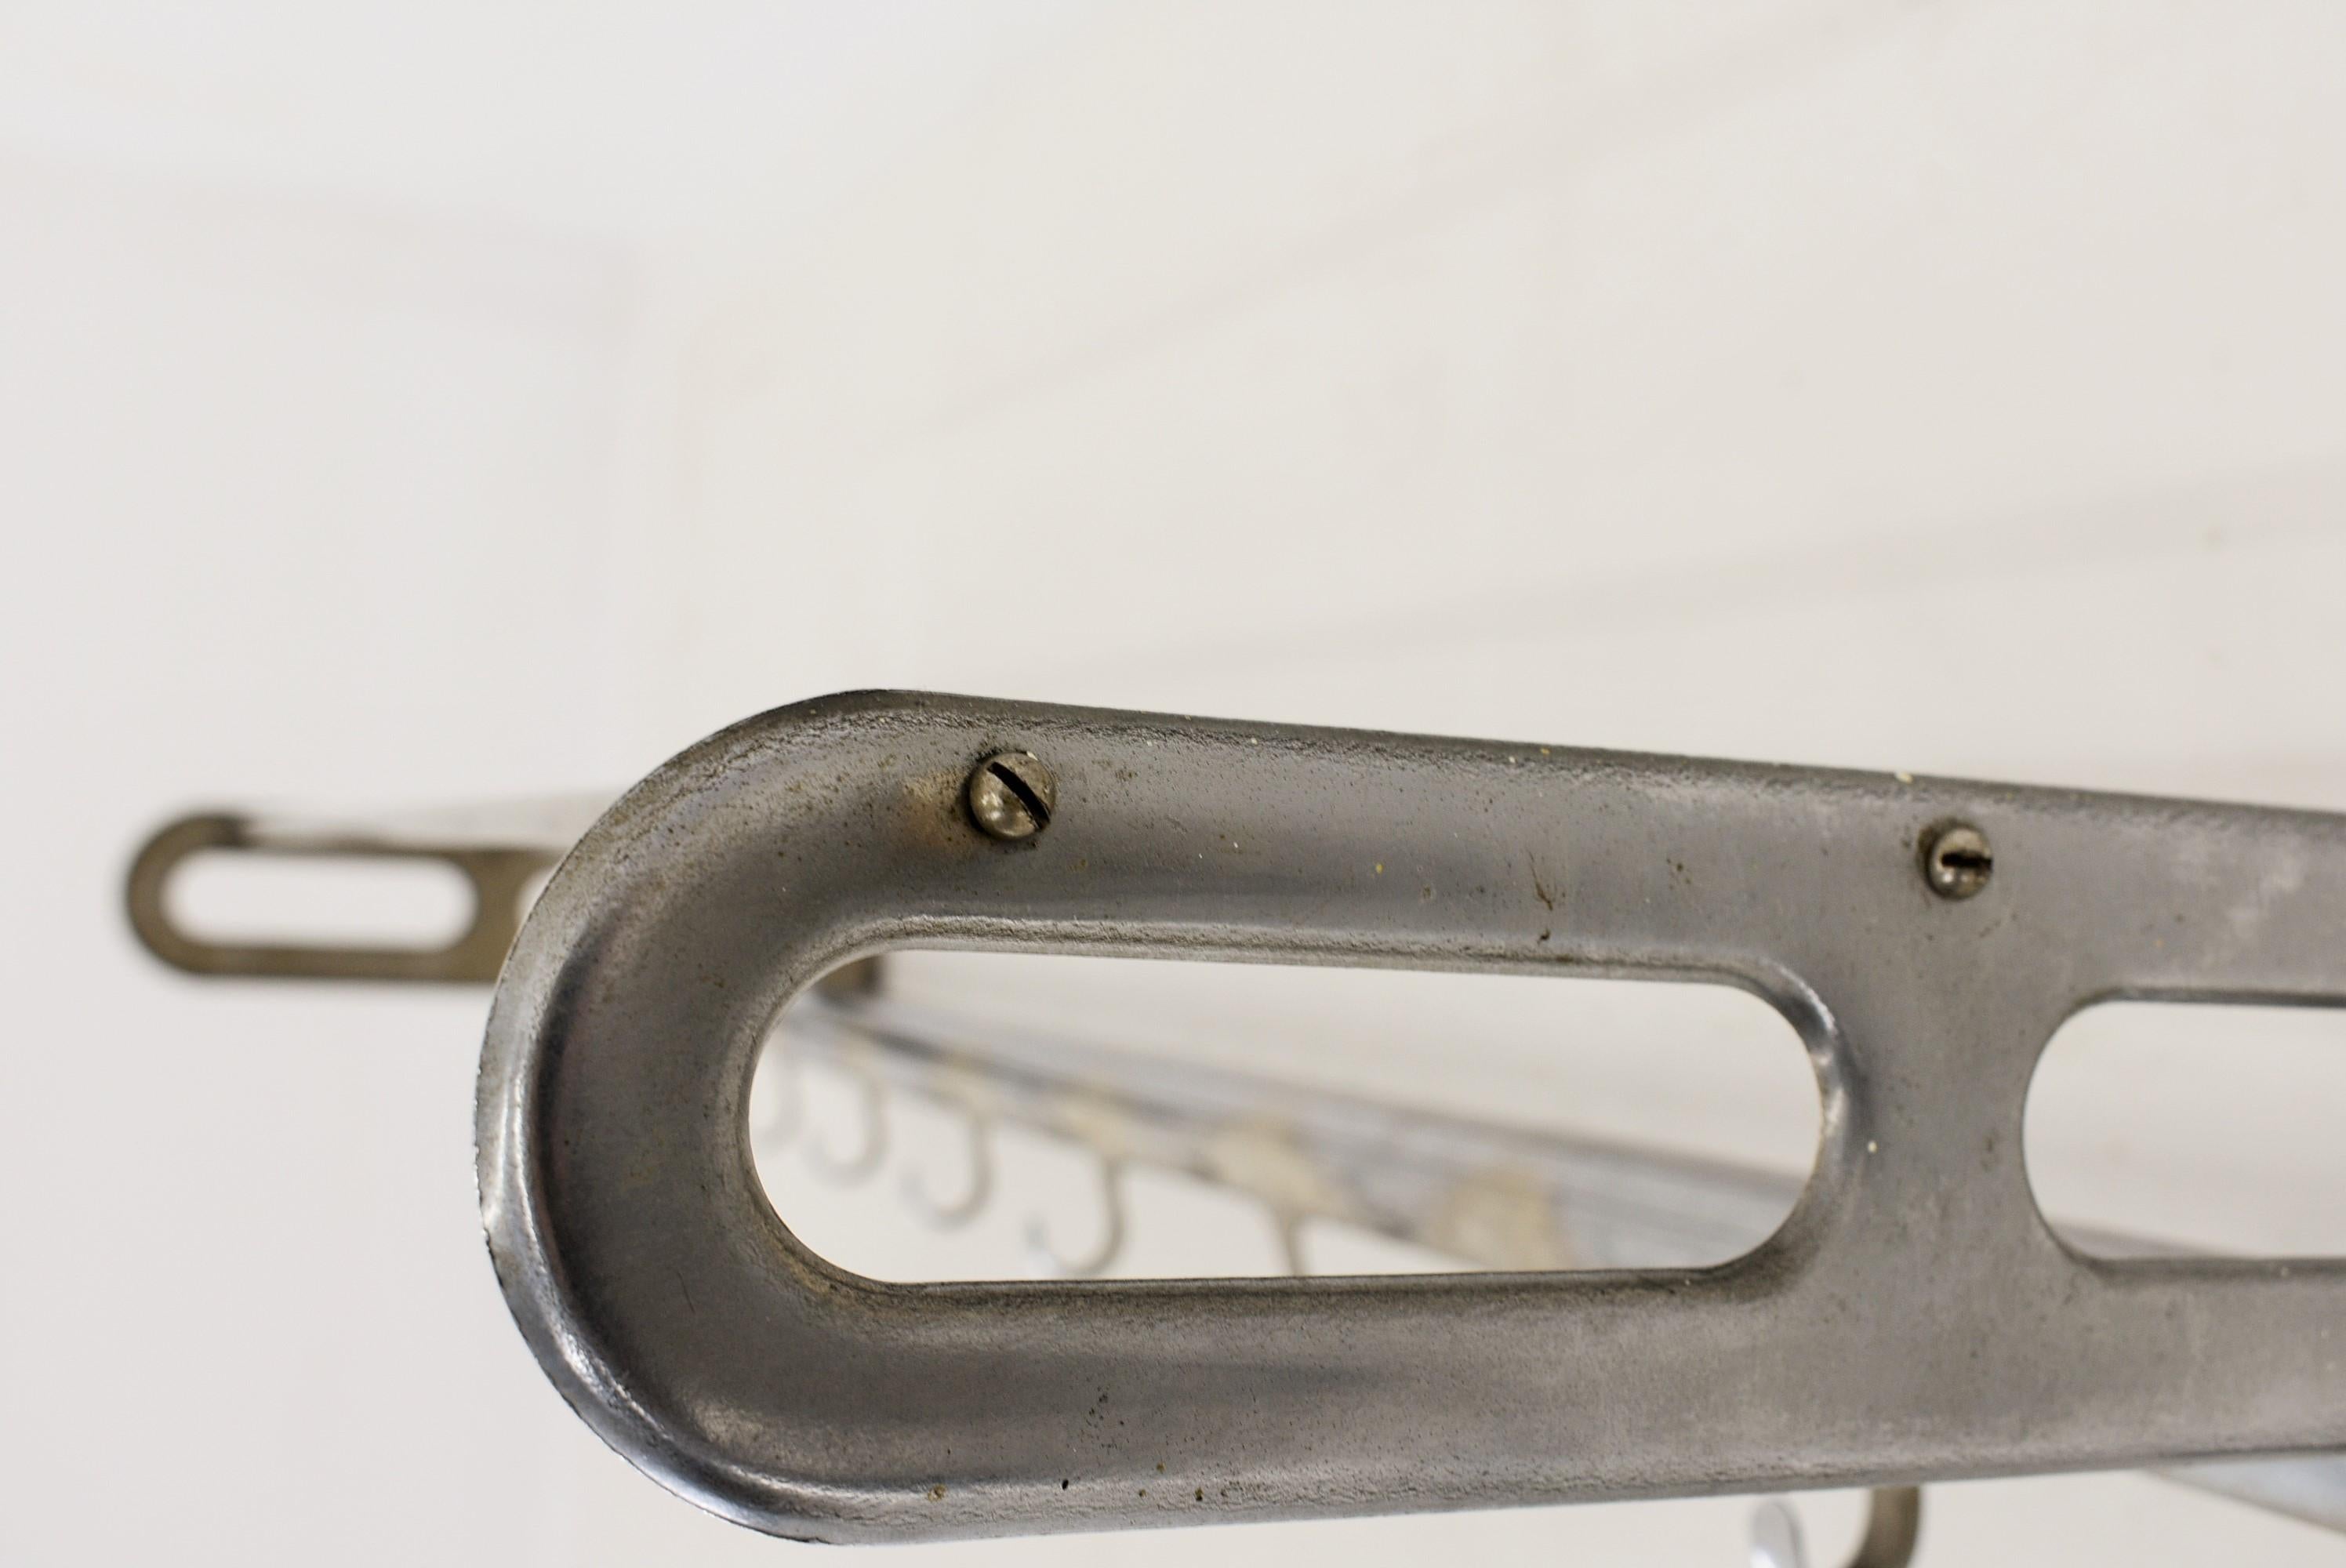 Bauhaus long coat hanger.
Cleaned.
Chrome with age patina.